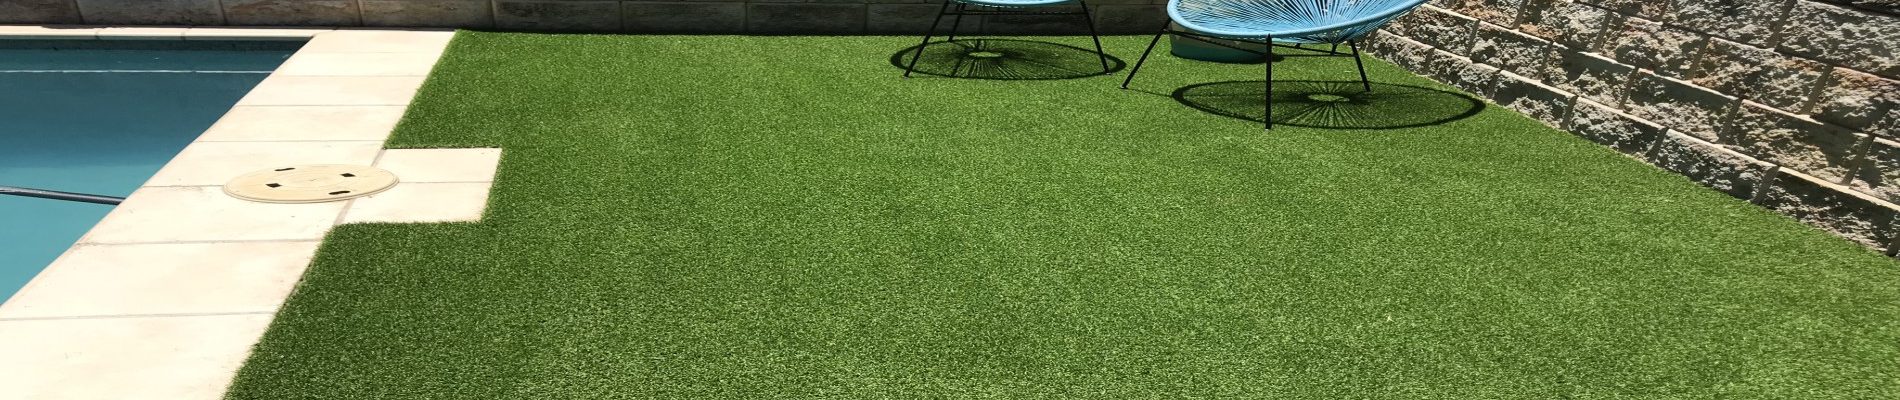 Coastal Turf provides the aesthetics of a freshly cut lawn 365 days of the year